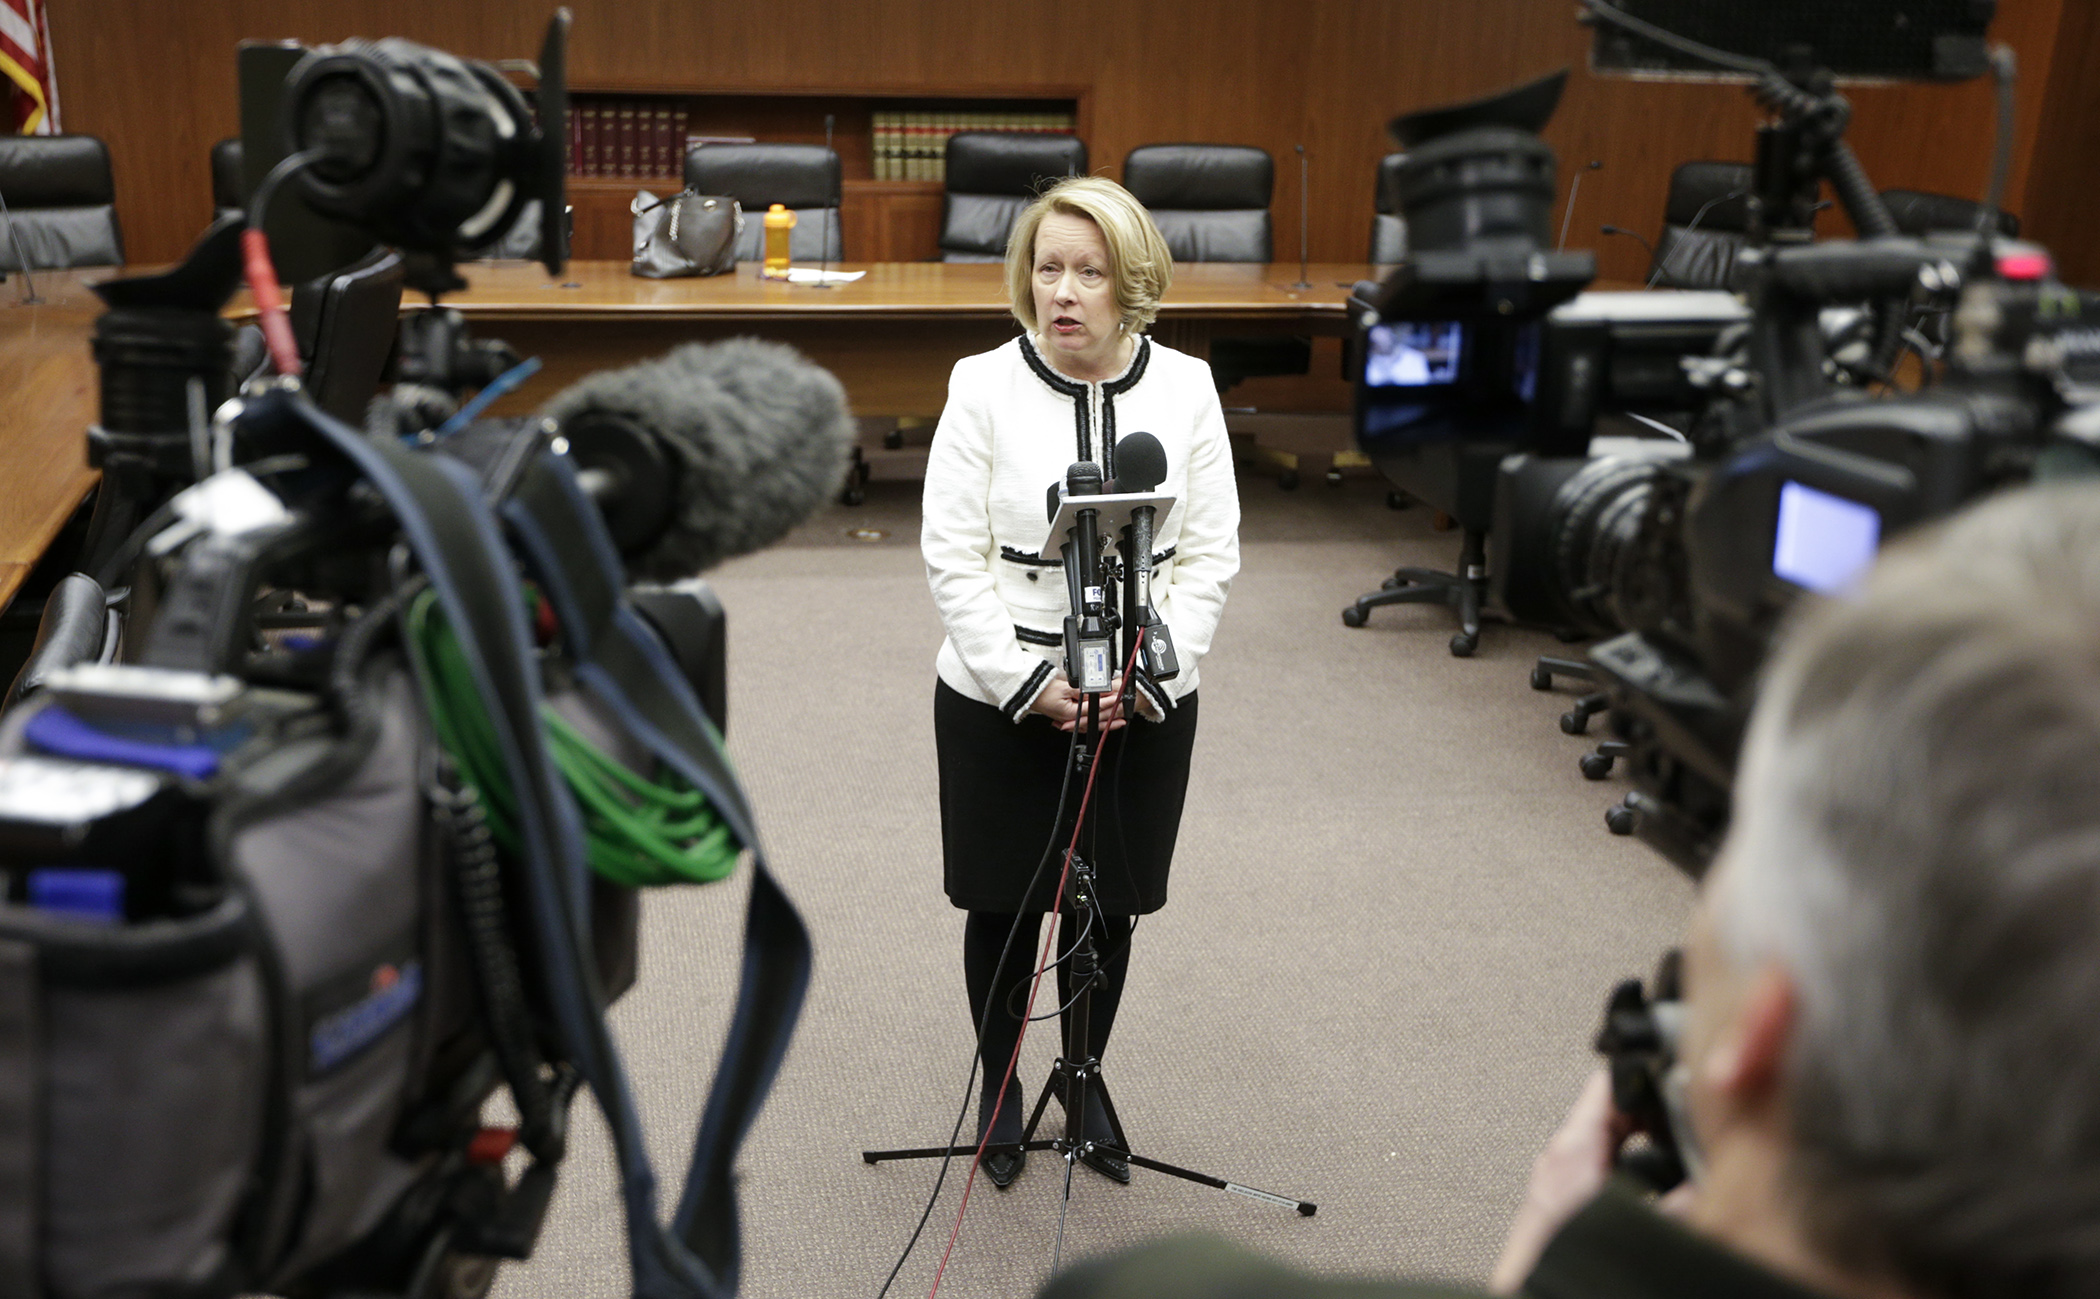 Rep. Jenifer Loon, chair of the House Education Finance Committee, speaks with the media before a March 6 hearing on her bill, HF3320, allowing districts to fund and prioritize safety and security upgrades in Minnesota schools. Photo by Paul Battaglia